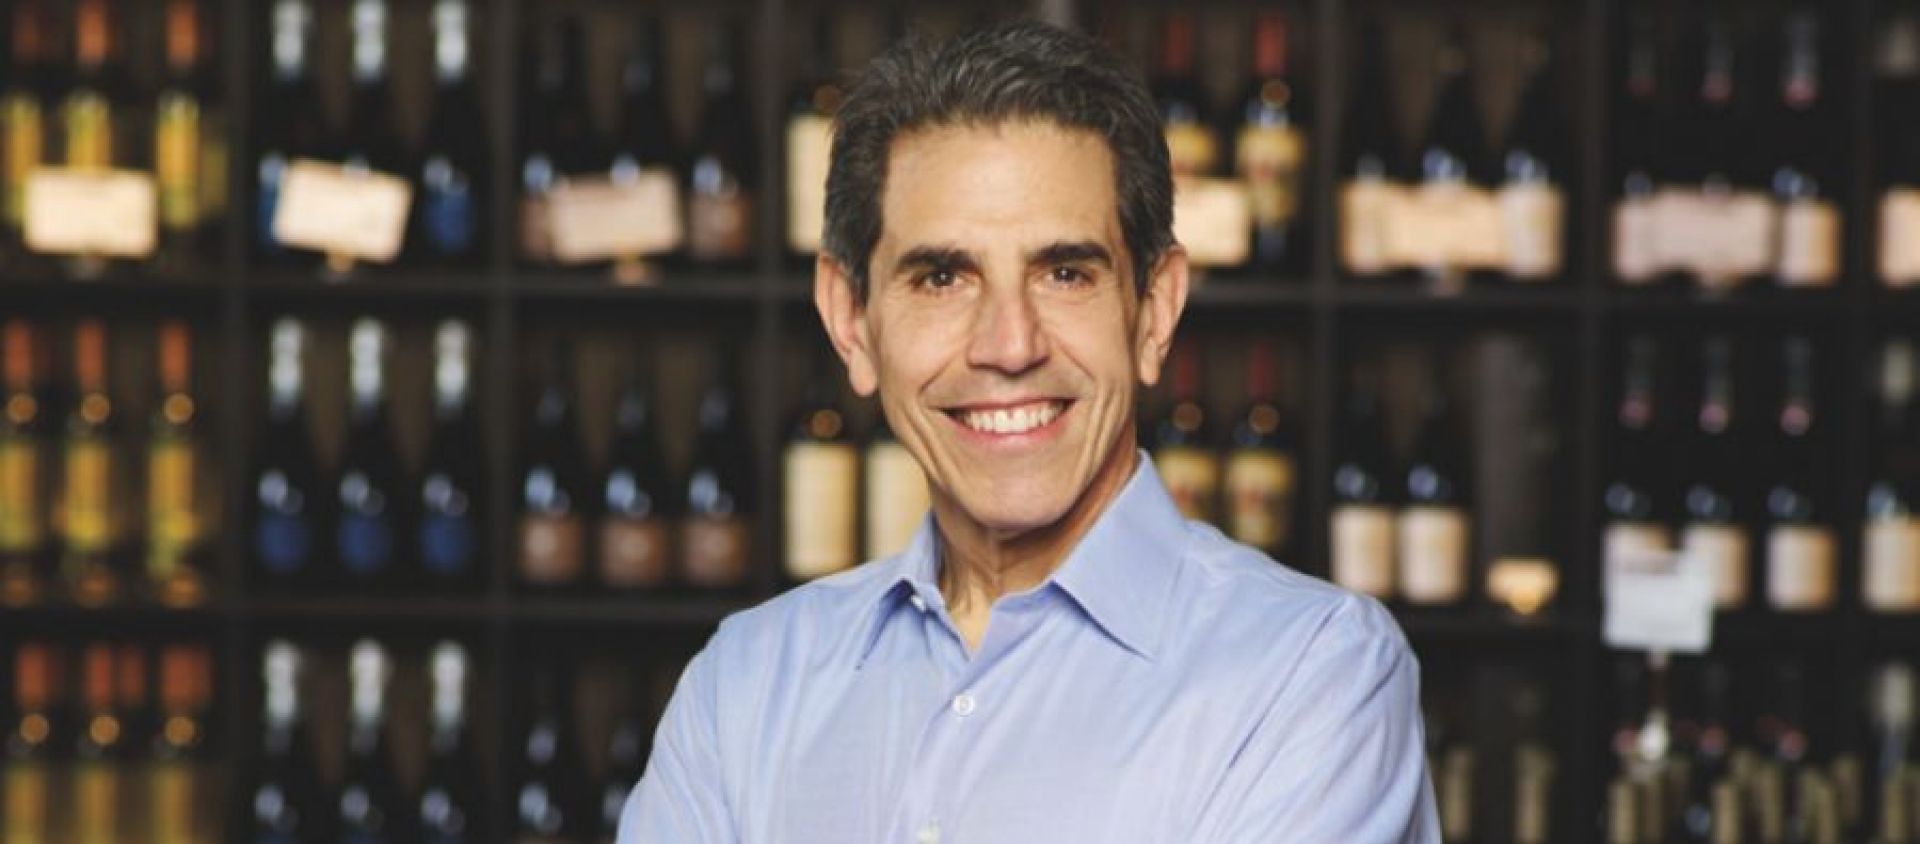 Photo for: Gary Fisch on his 35 years of experience at Gary’s Wine and Marketplace